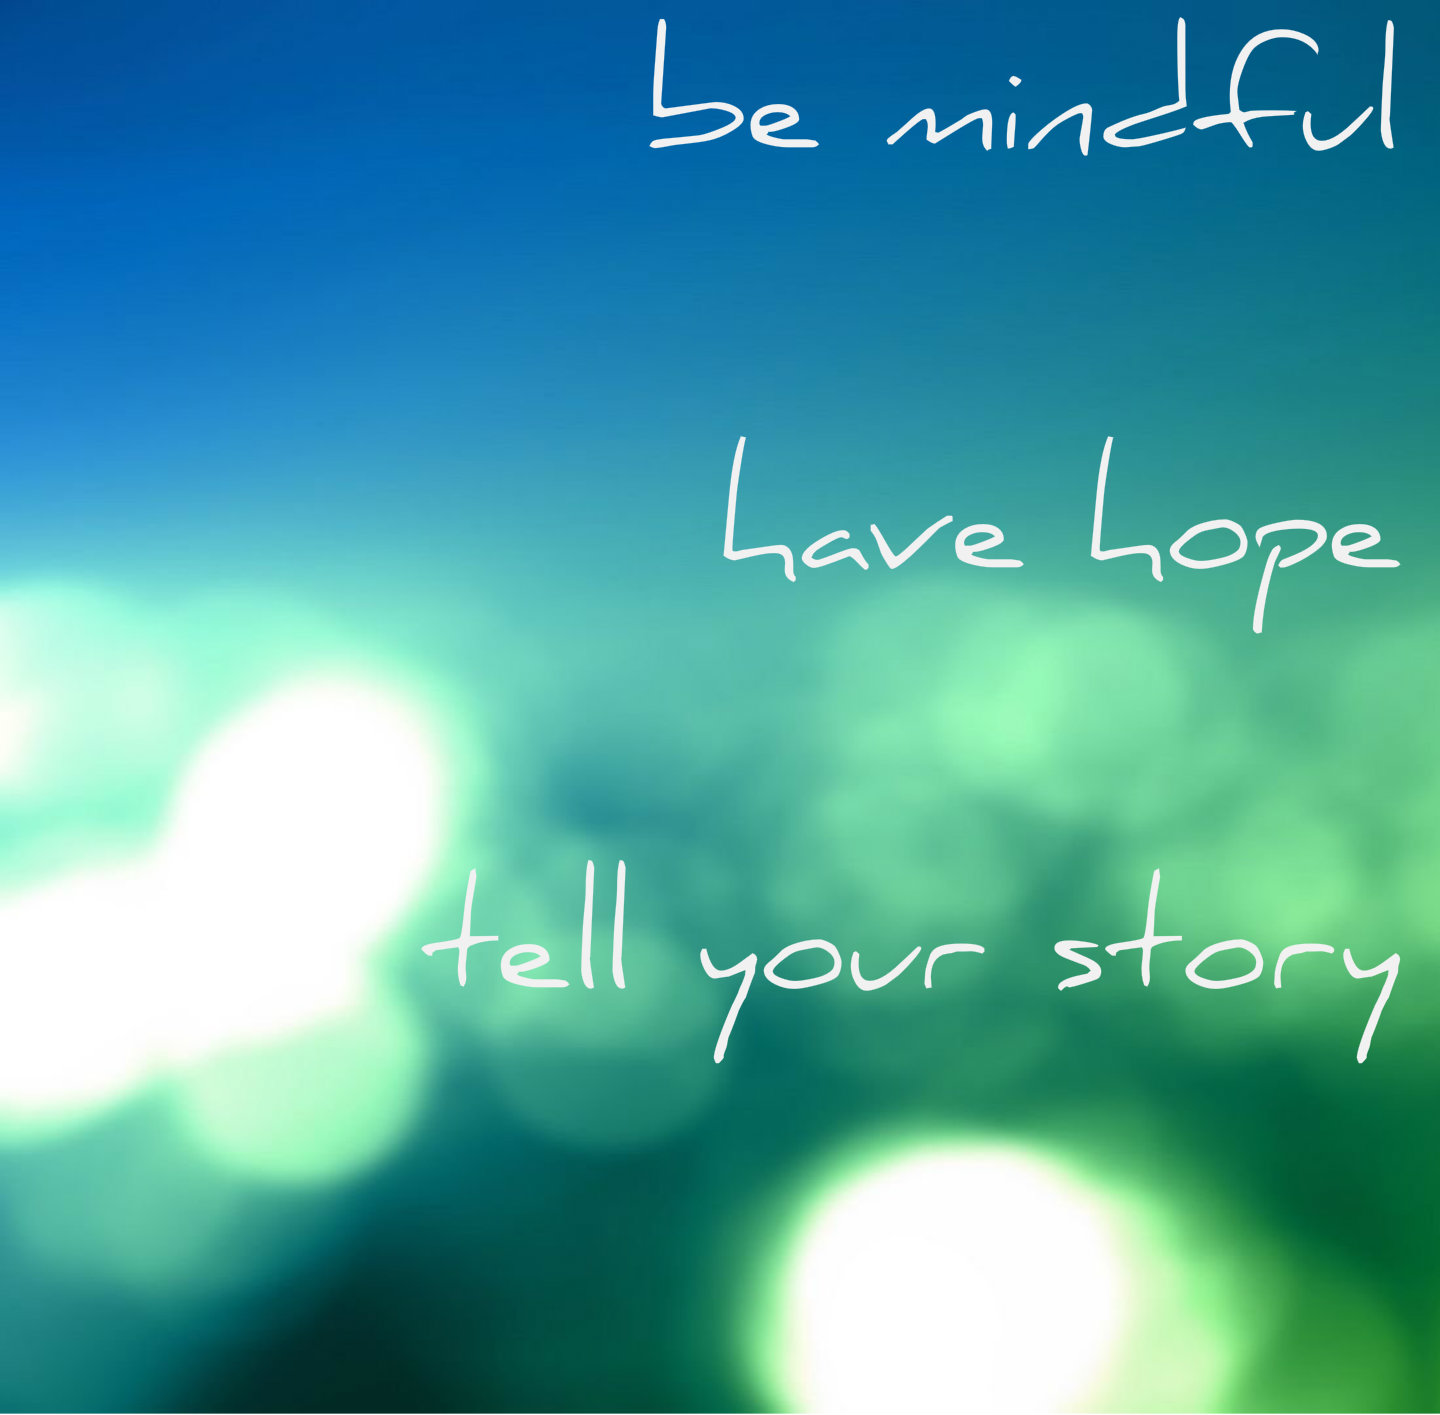 be mindful have hope tell your story